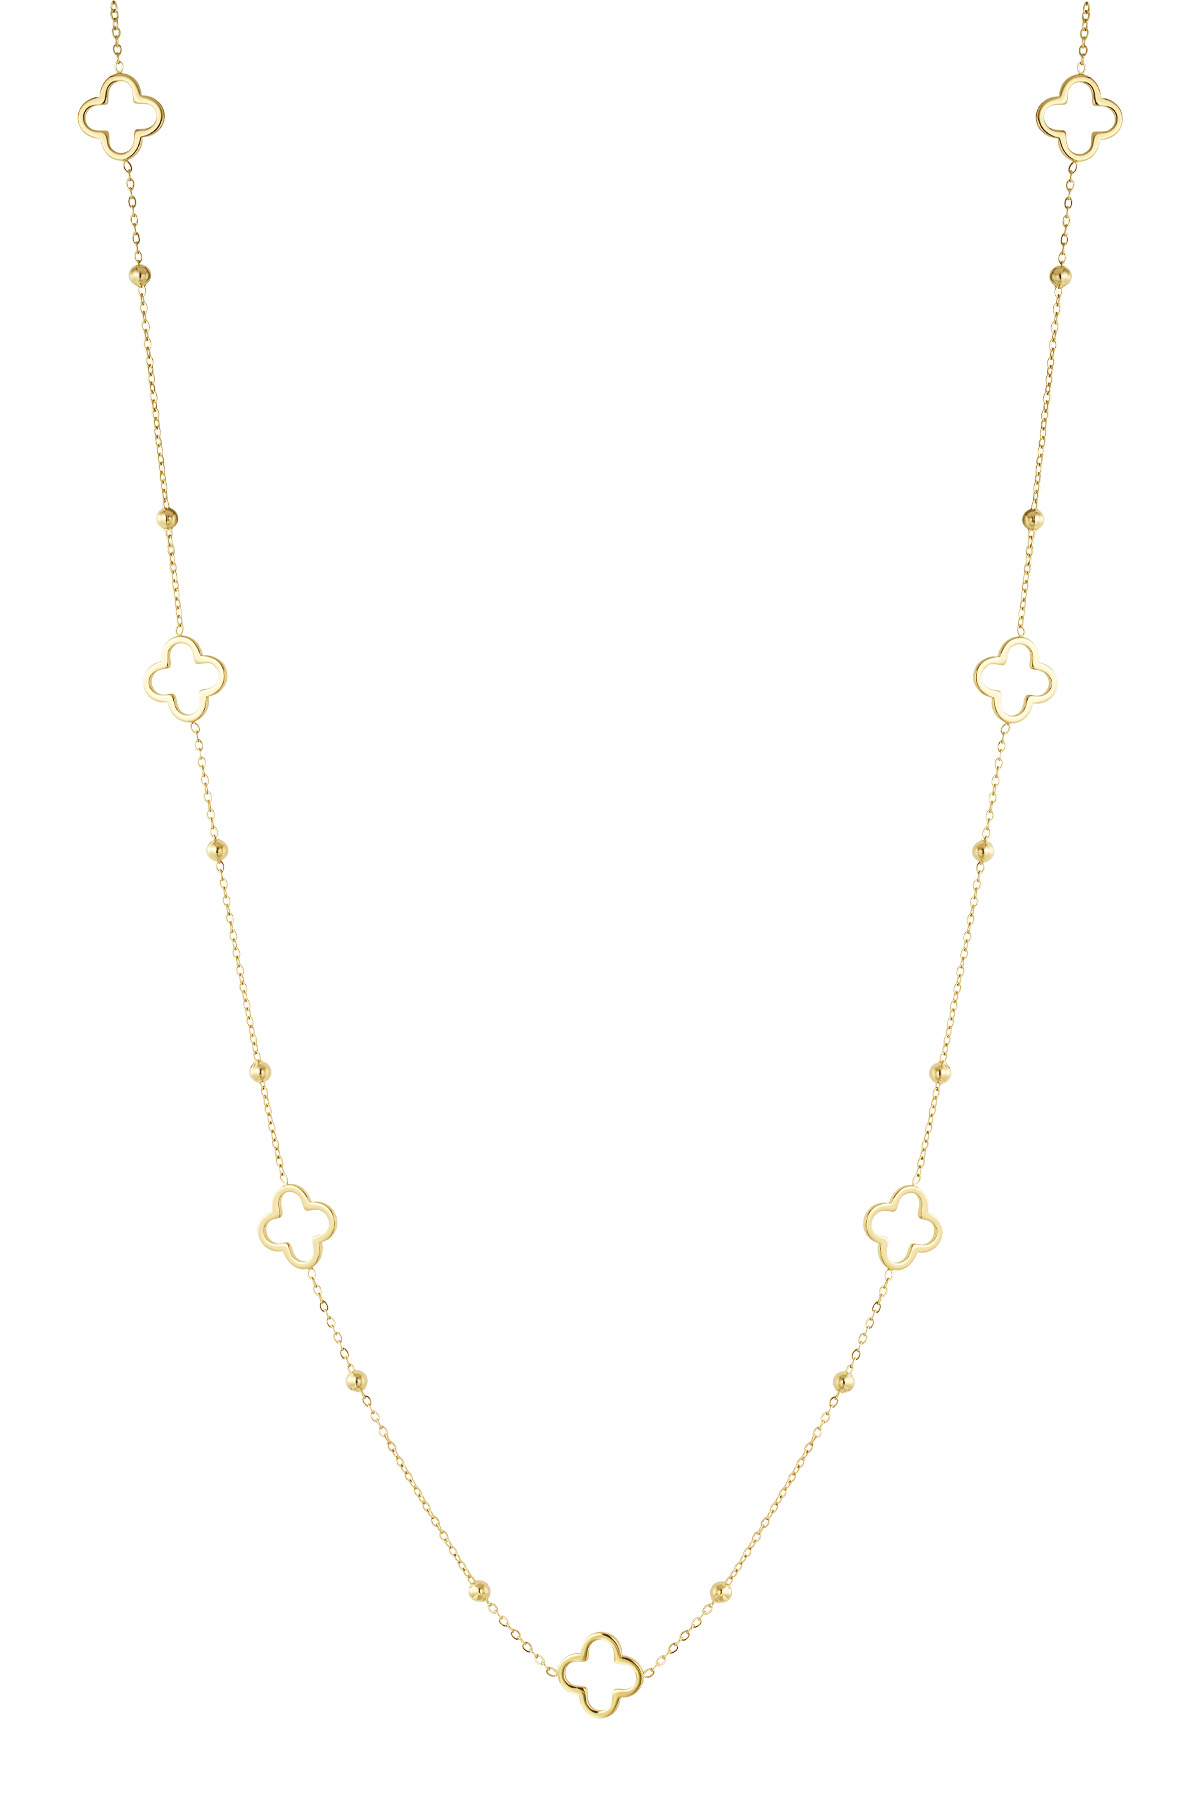 Long necklace with clover charms - gold 